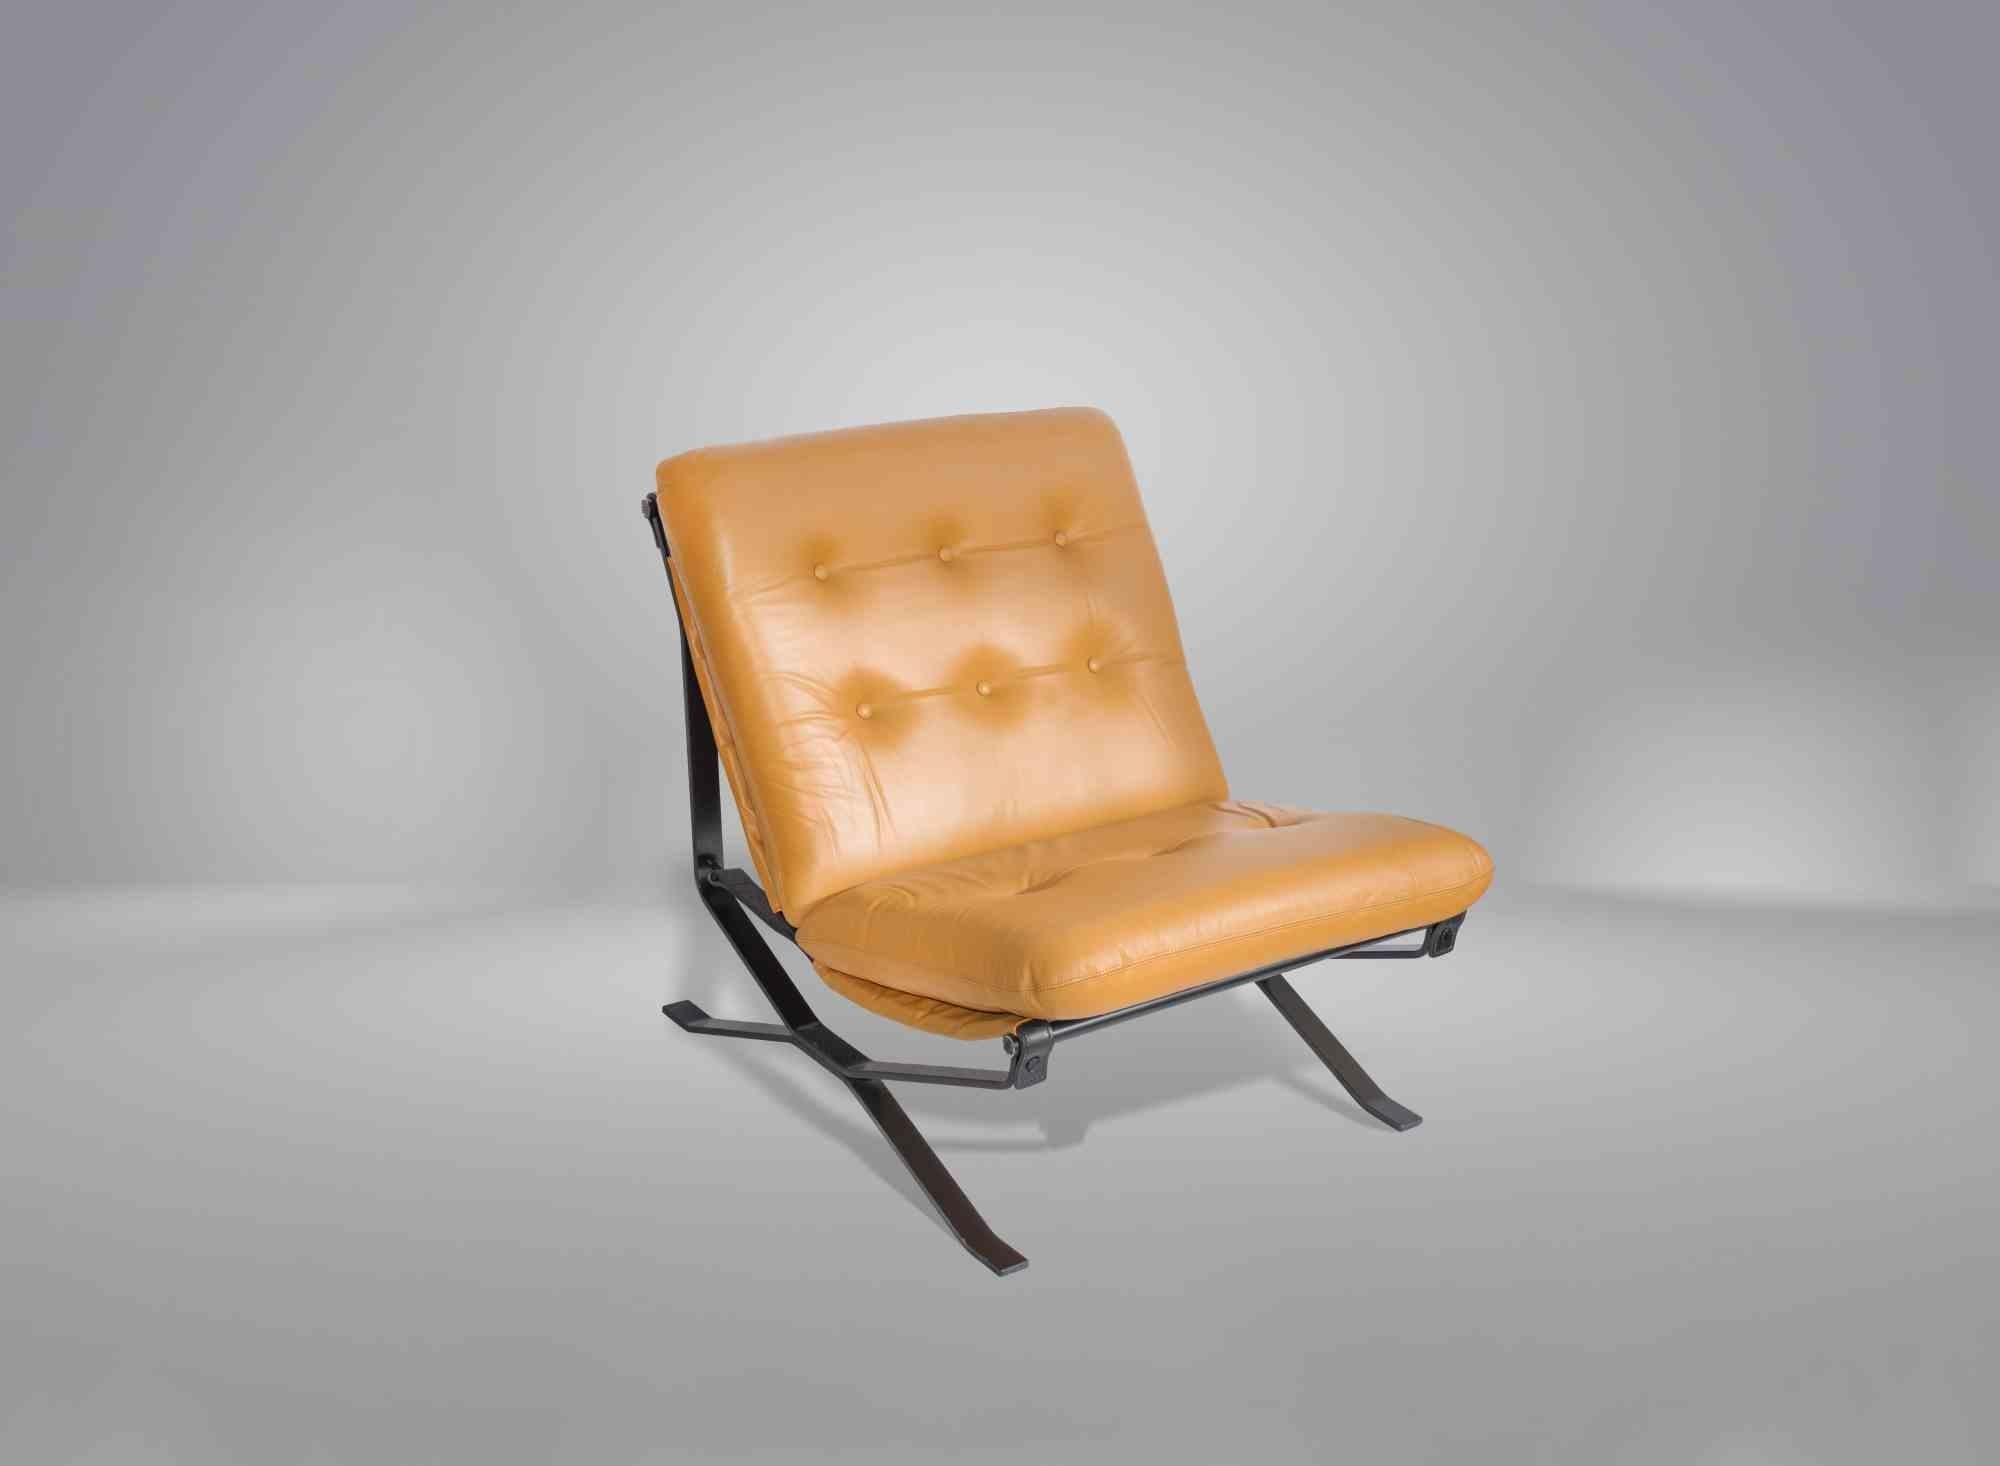 Leather Pair of Lotus Armchair by Ico and Luisa Parisi, Mid-20th Century For Sale